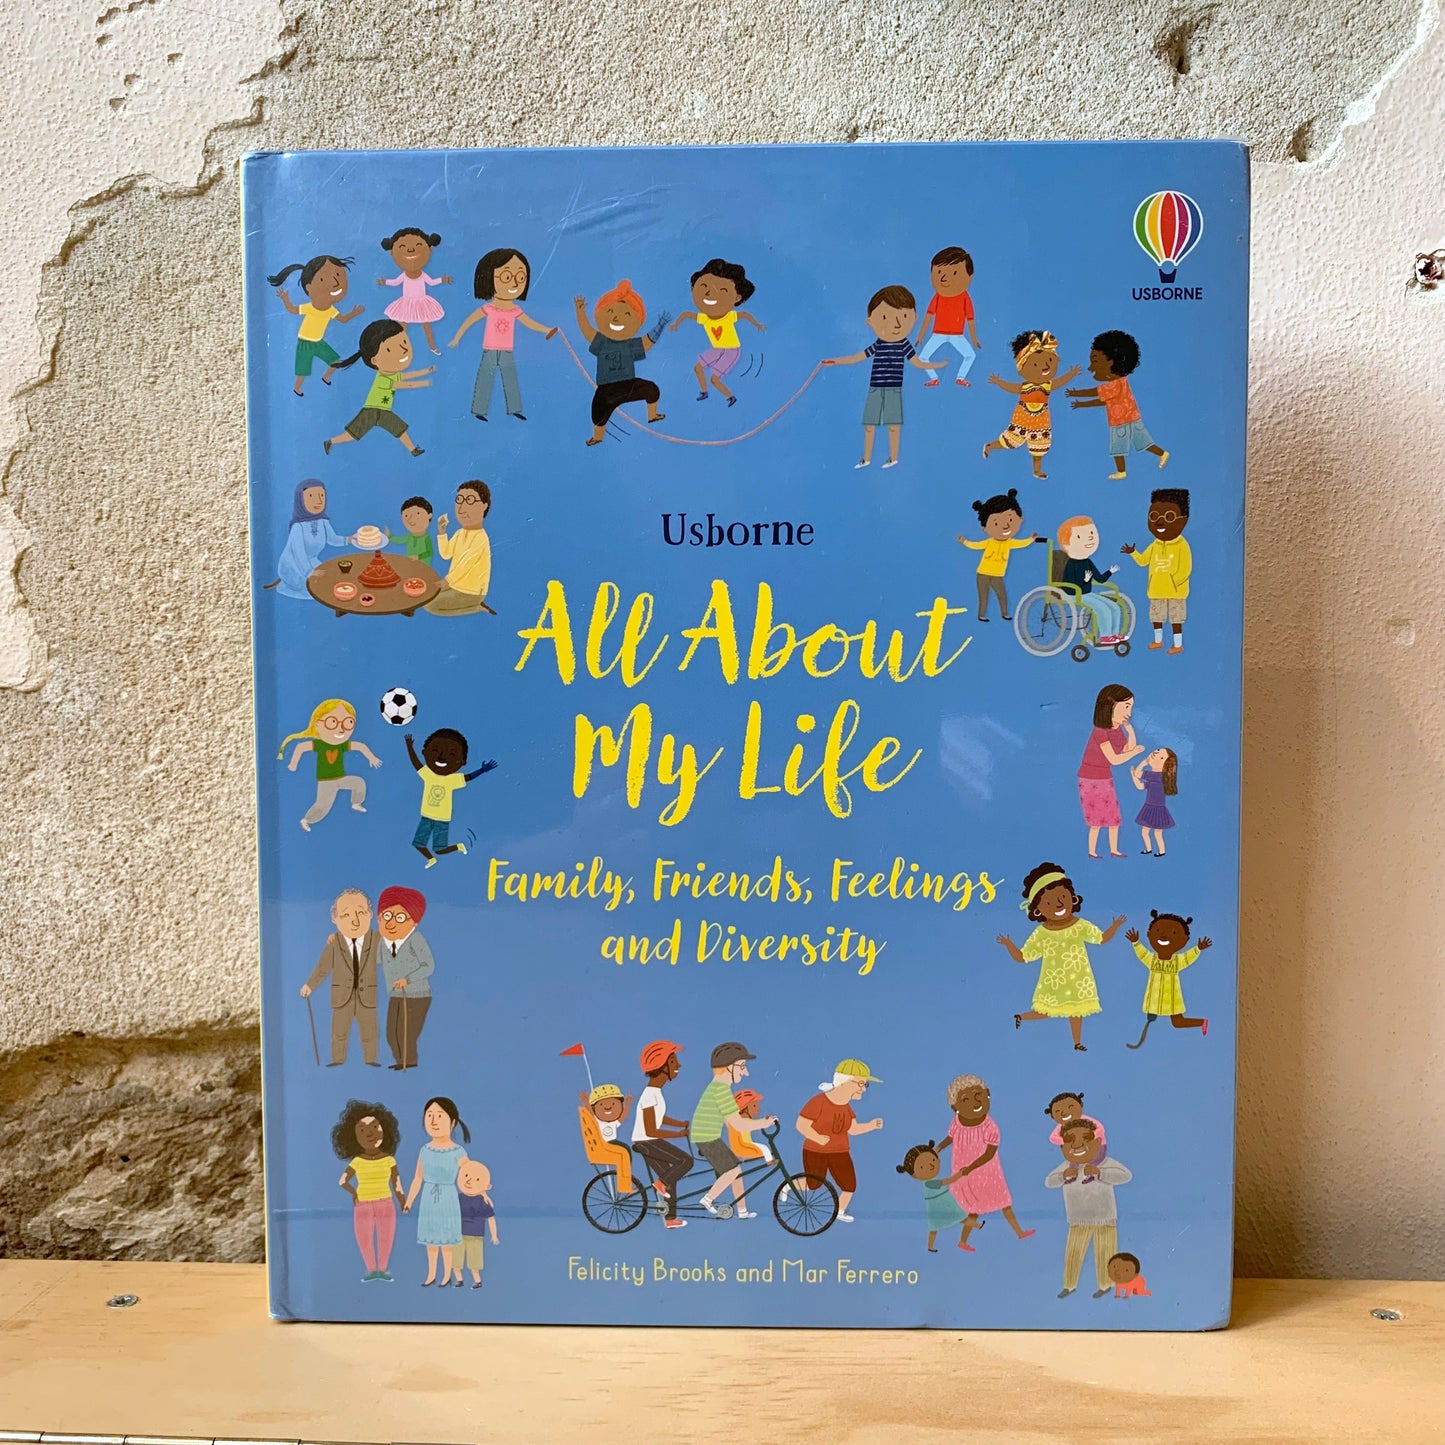 All About My Life: Family, Friends, Feelings and Diversity